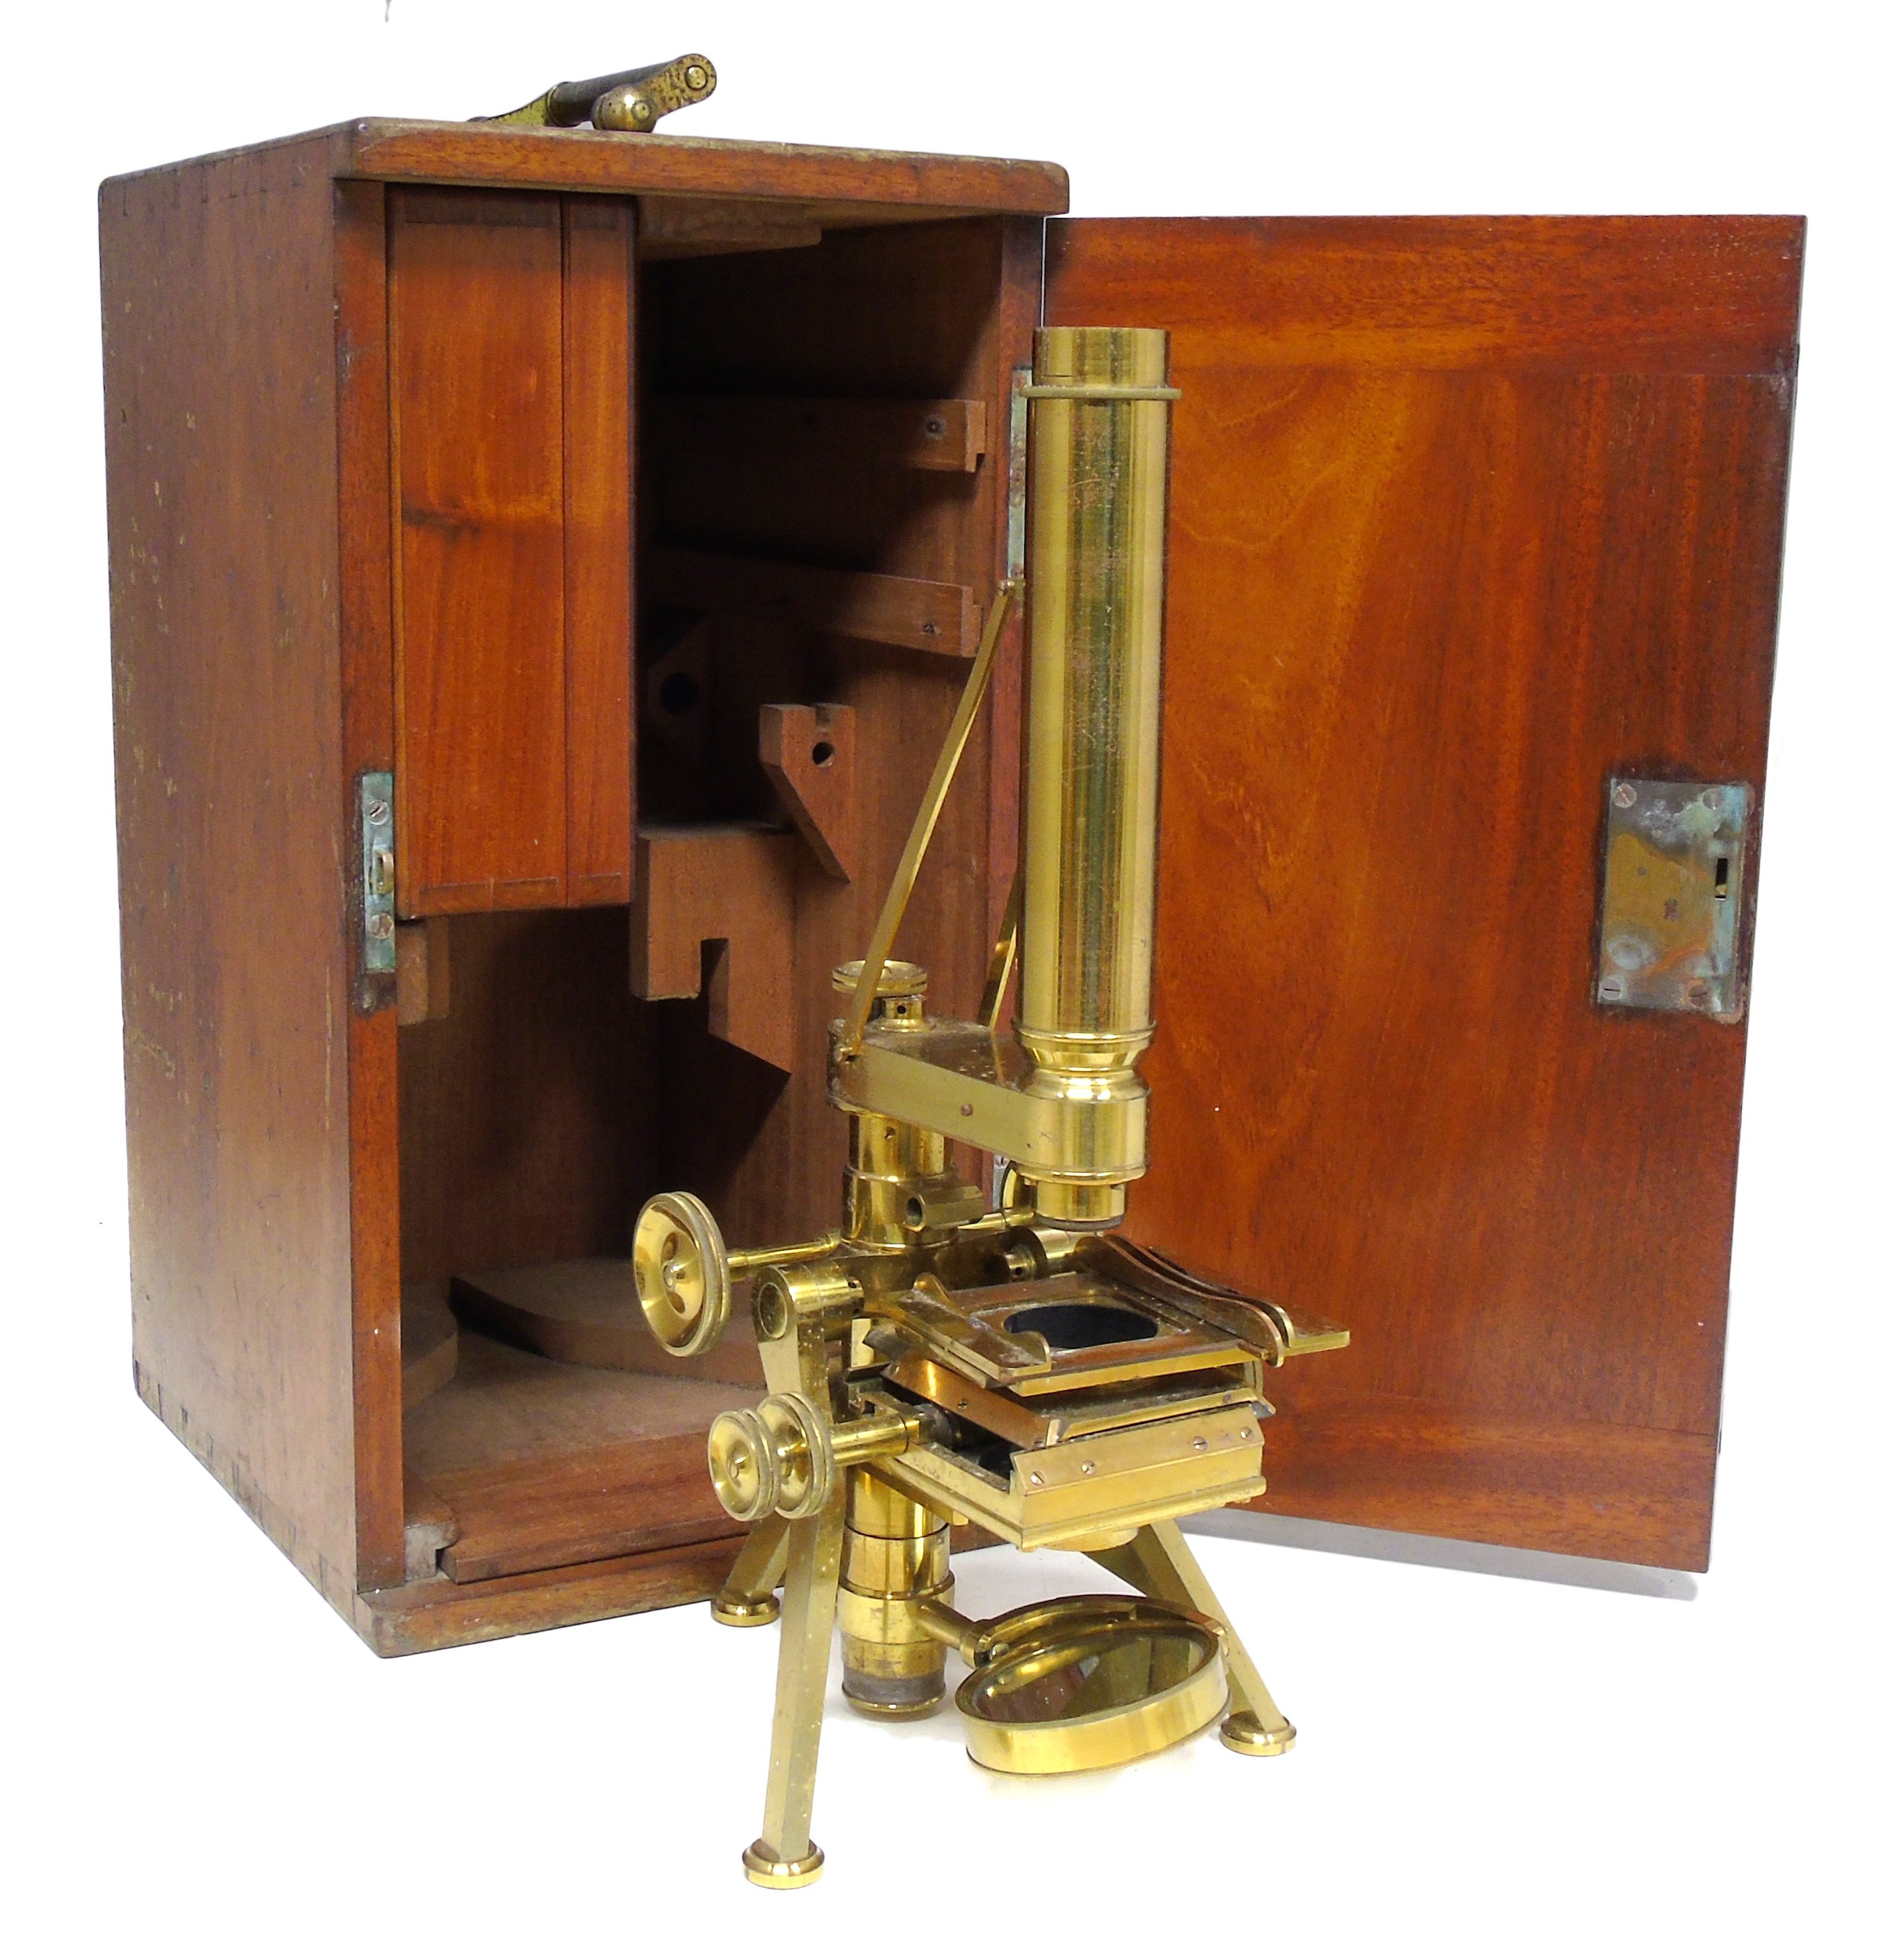 Monocular brass microscope by Powell & Lealand, Euston Road, London, contained in mahogany case, box of accessories including various eye pieces, microscope height 37cm (14").